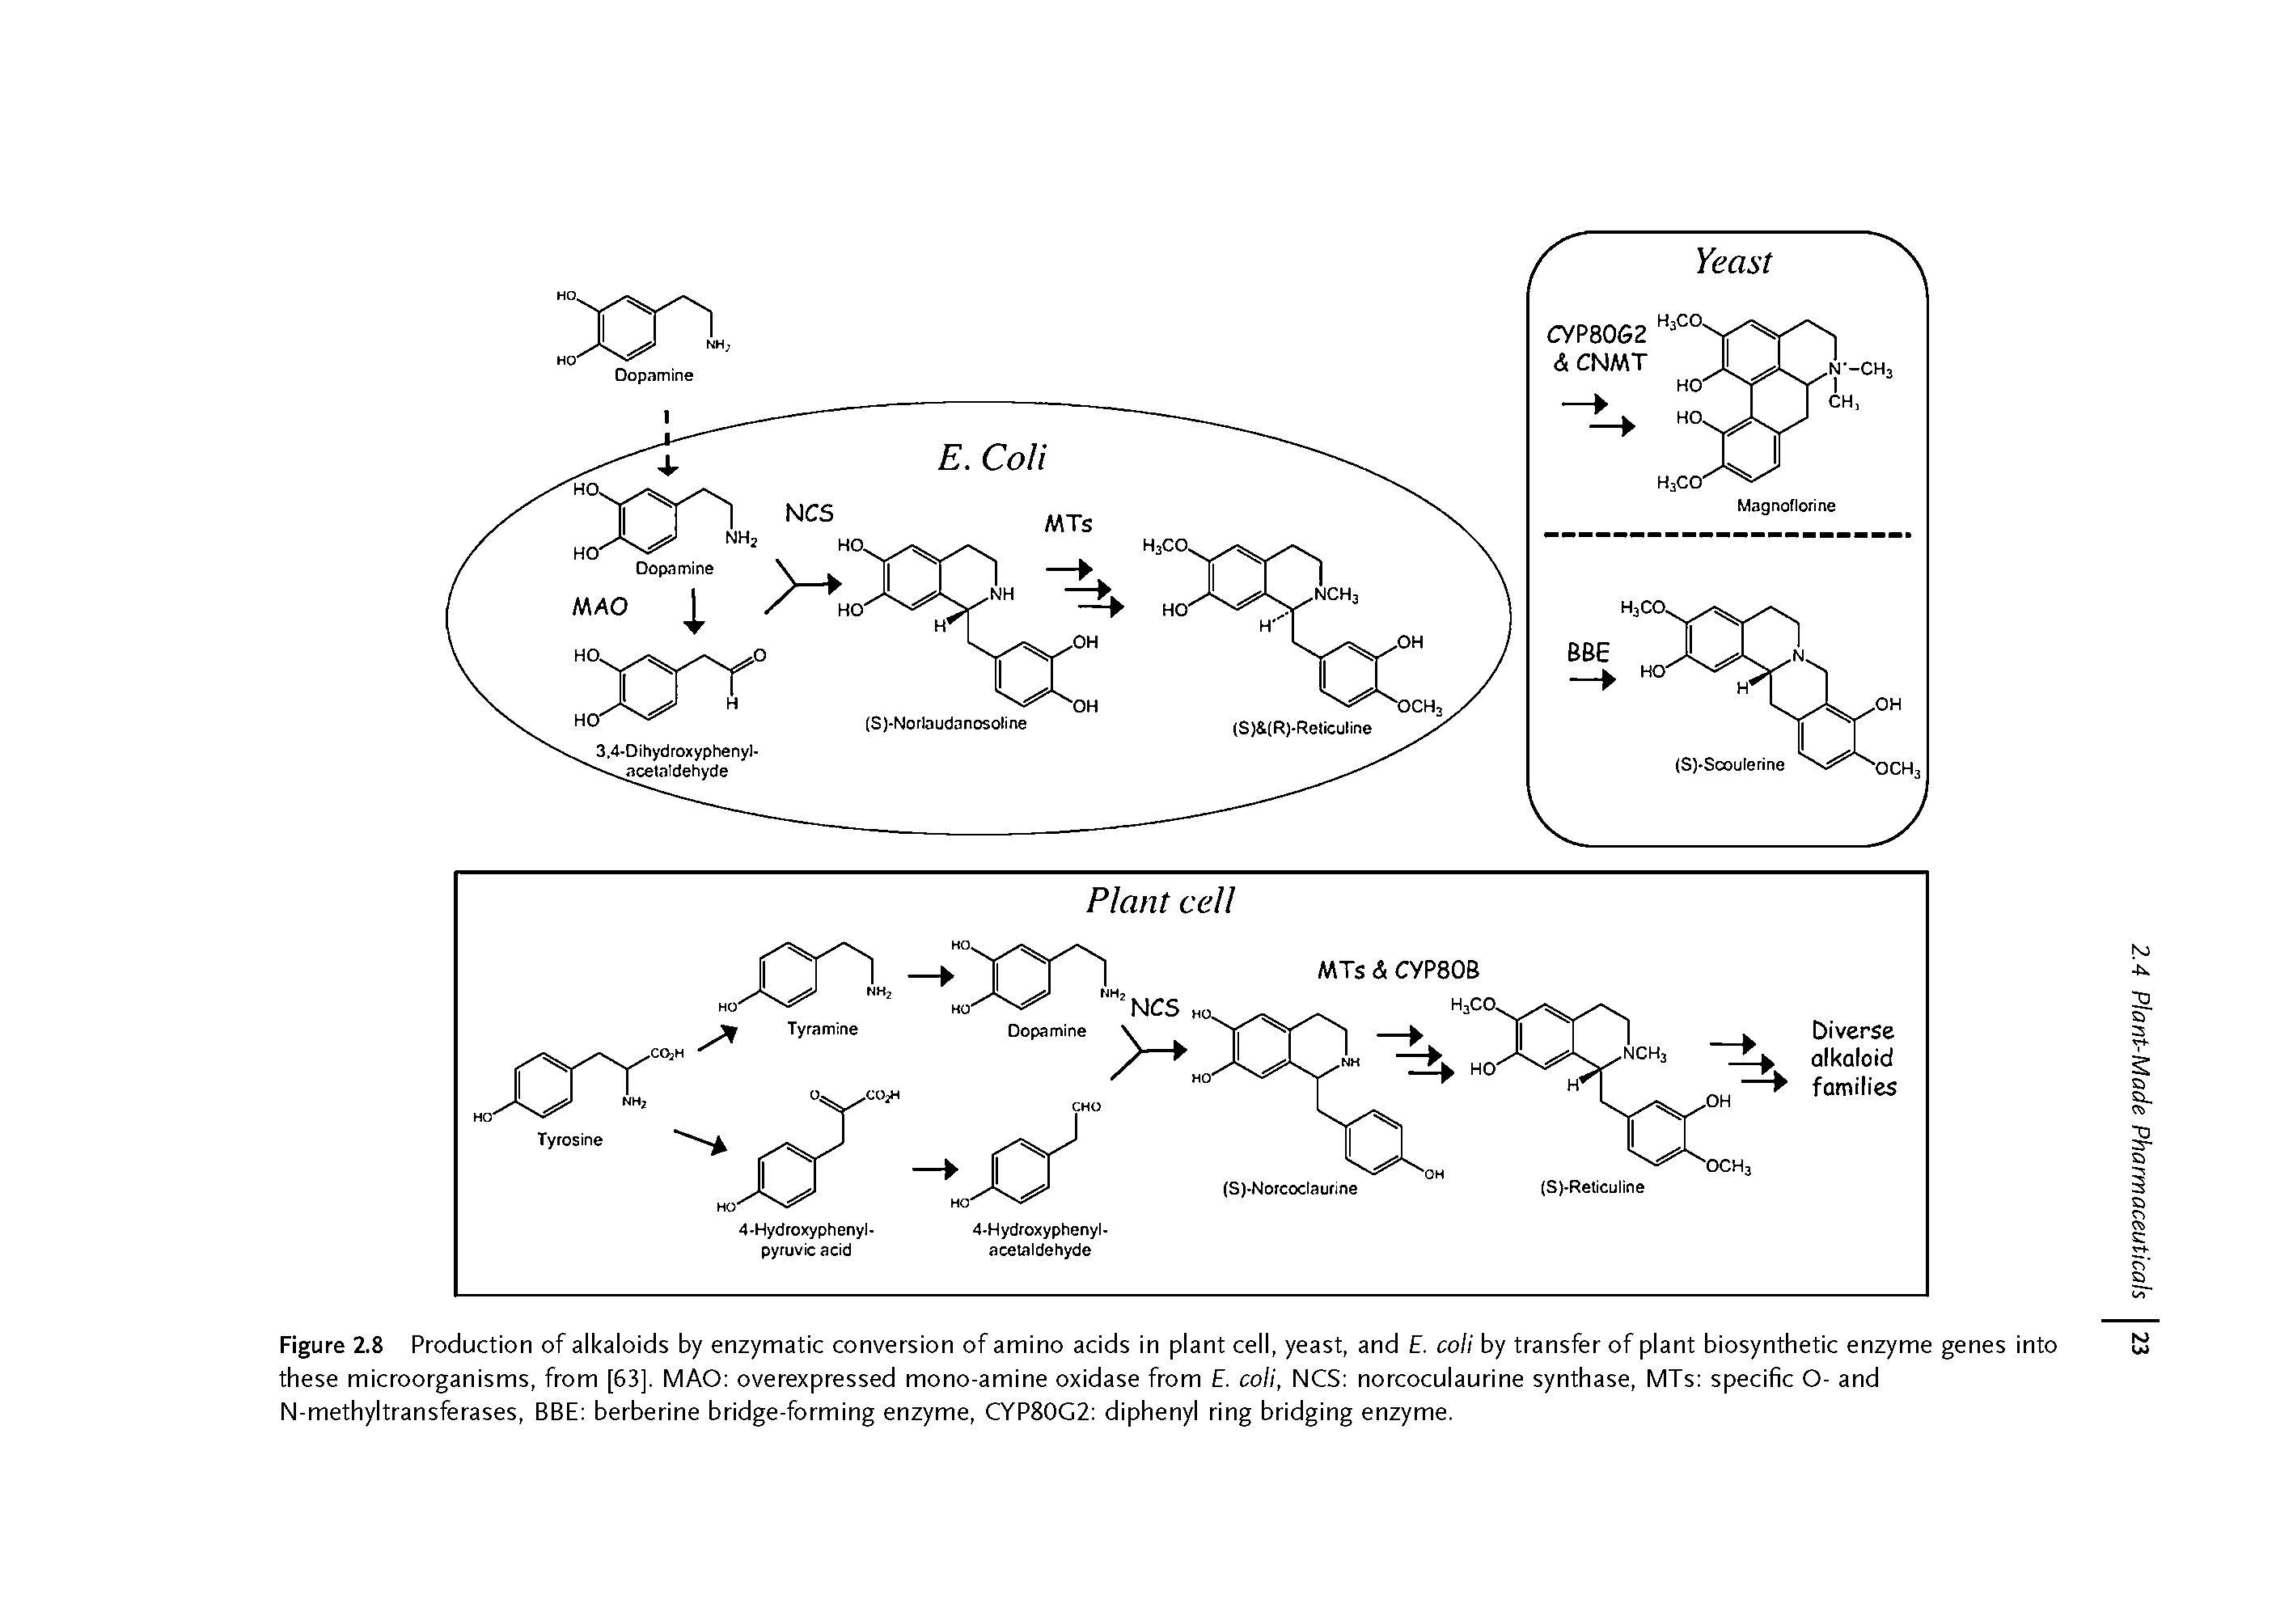 Figure 2.8 Production of alkaloids by enzymatic conversion of amino acids in plant cell, yeast, and E. coli by transfer of plant biosynthetic enzyme genes into these microorganisms, from [63]. MAO overexpressed mono-amine oxidase from E. coli, NCS norcoculaurine synthase, MTs specific O- and N-methyltransferases, BBE berberine bridge-forming enzyme, CYP80G2 diphenyl ring bridging enzyme.